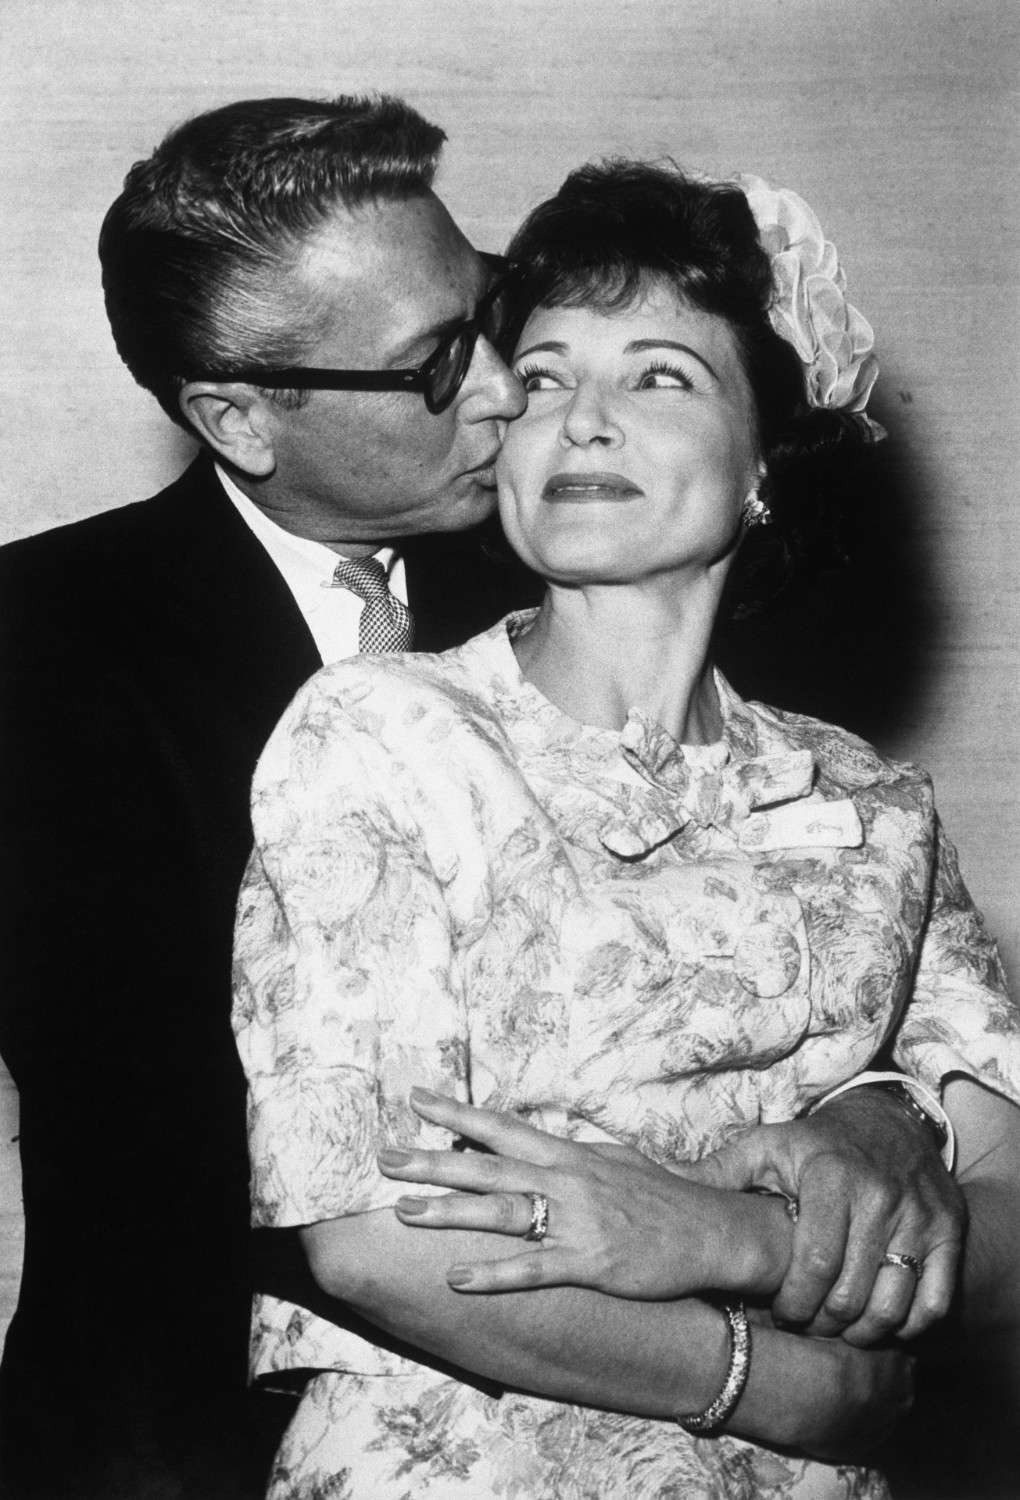 Betty White and Allen Ludden were married in 1963